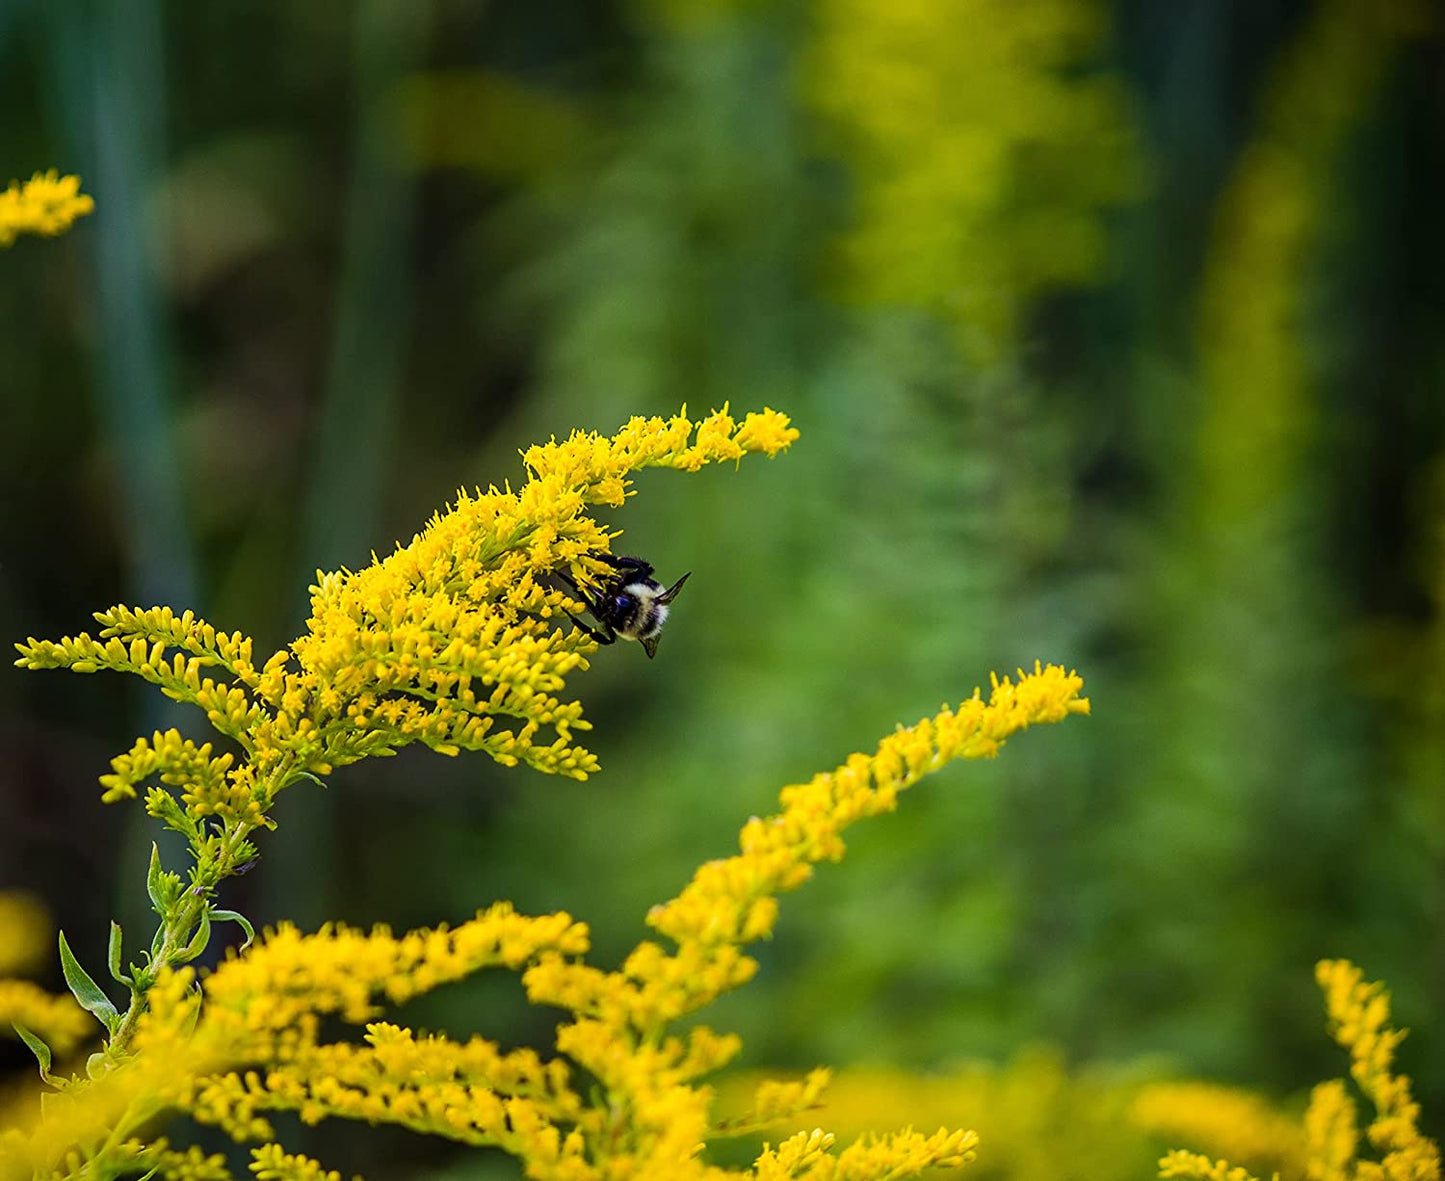 Hundredfold Gray Goldenrod, Old Field Goldenrod 500 Flower Seeds - Solidago nemoralis Canada Native Wildflower, Dwarf Goldenrod, Attract Bees and Butterflies